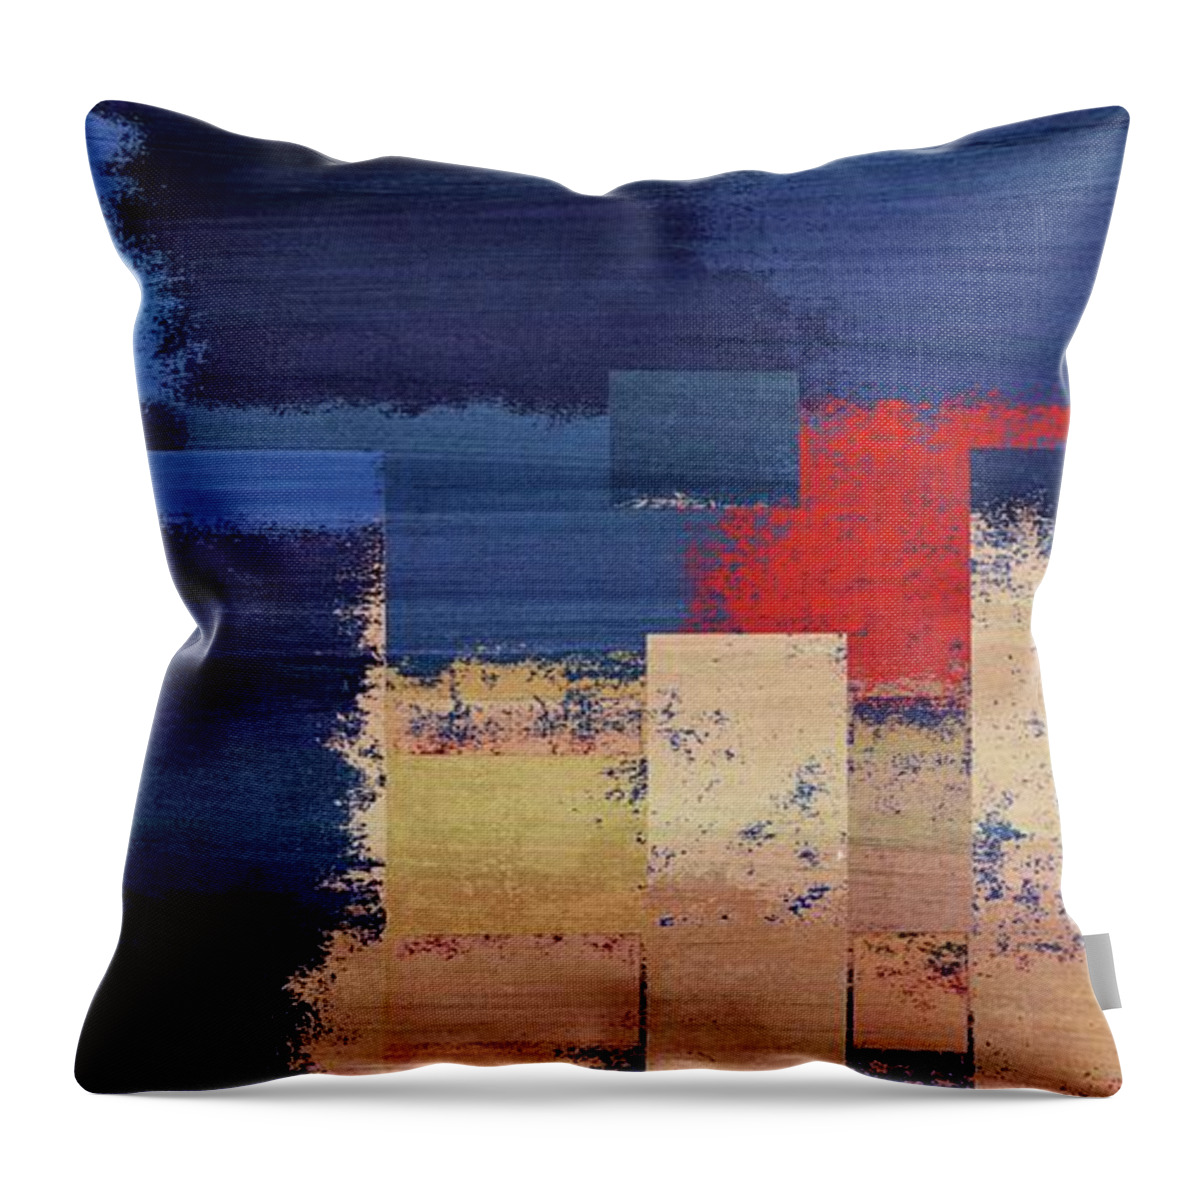 Abstract Throw Pillow featuring the digital art Nonexpectation-0102c by Variance Collections